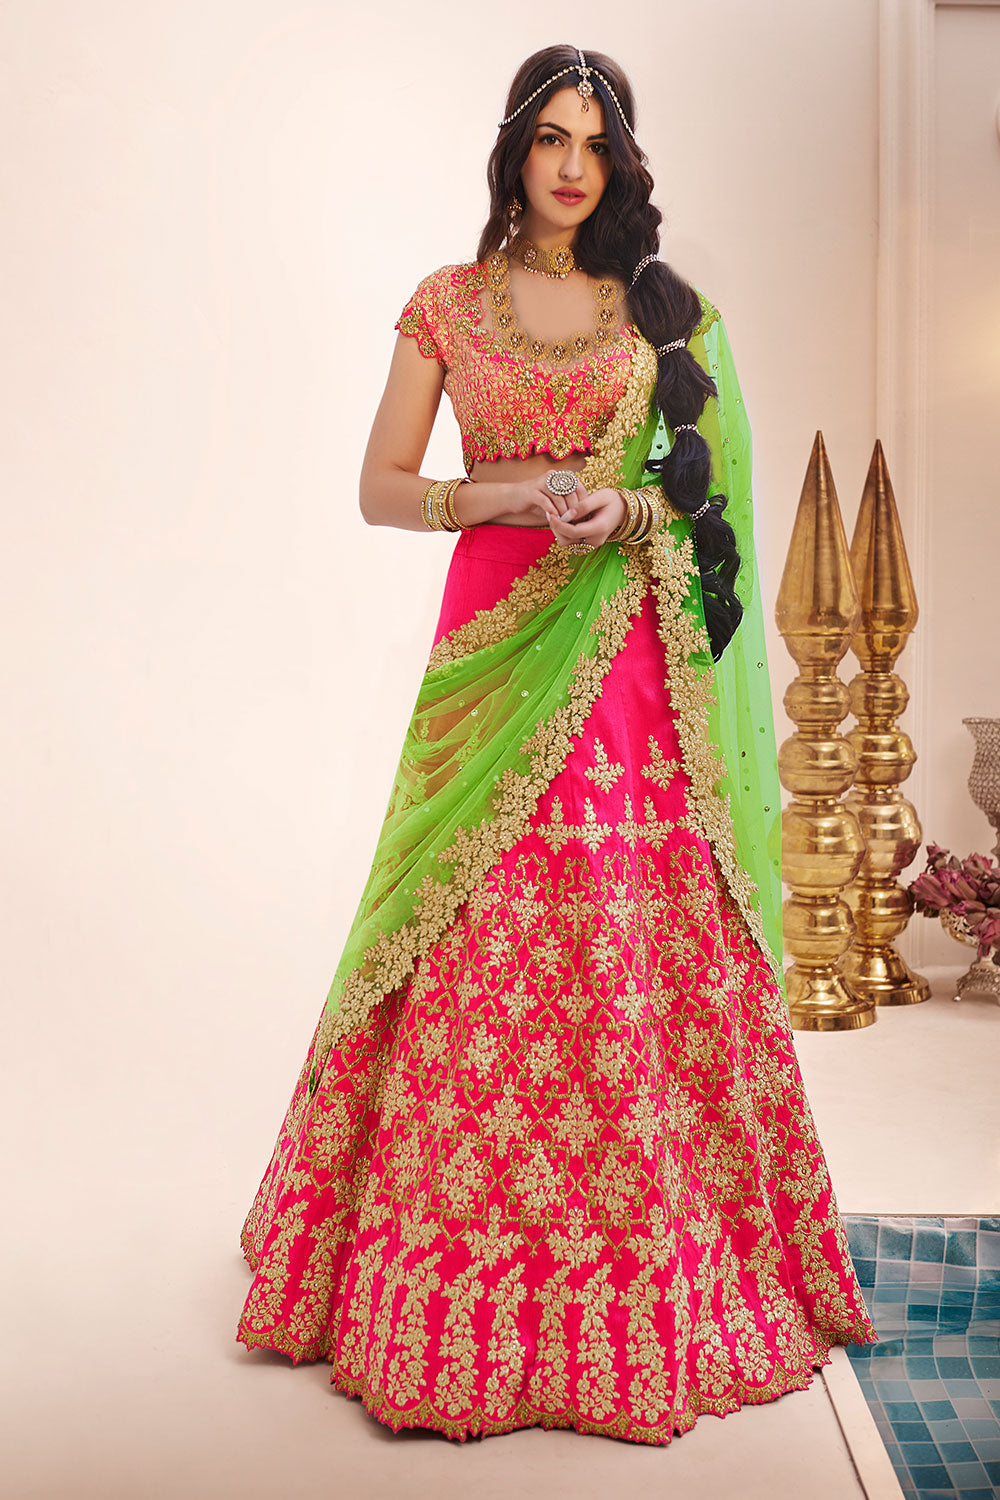 Pink Colored Bright Square Net Butta Work Lehenga Choli at Rs 1395 in Surat  | ID: 14960478648